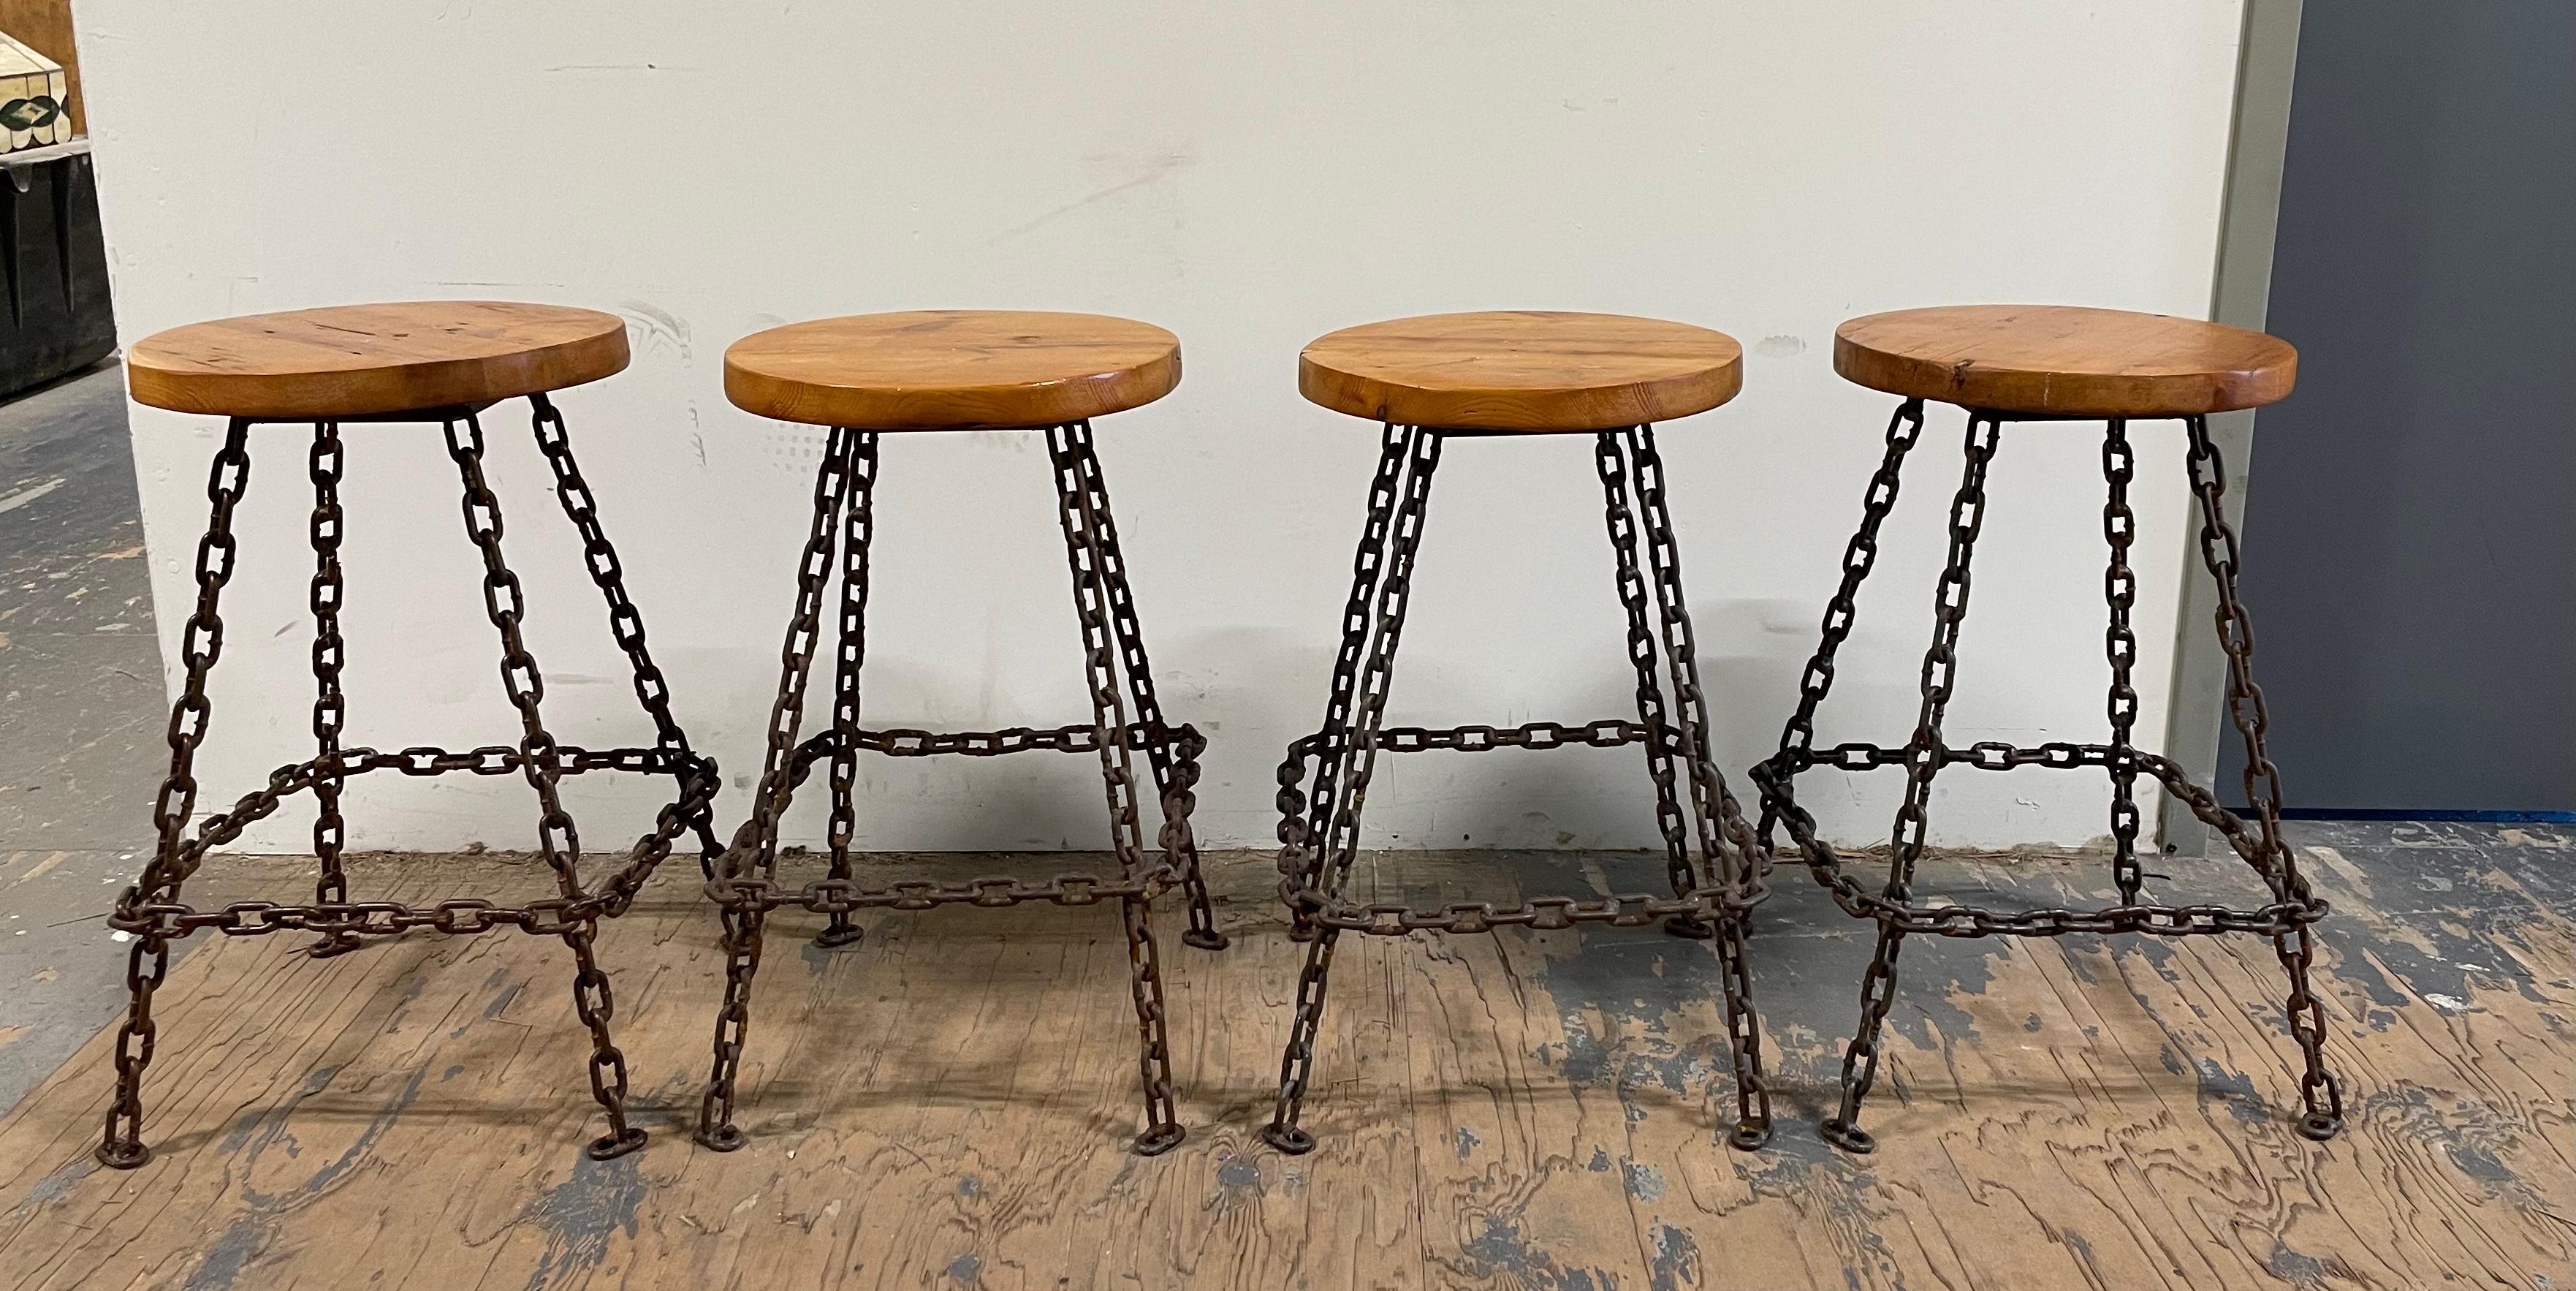 Set of four brutalist bar stools made of welded marine chain and varnished wood seats. Oxidation on metal as shown on pictures. Sturdy and in great condition. Some scuffs and scratches to seats.